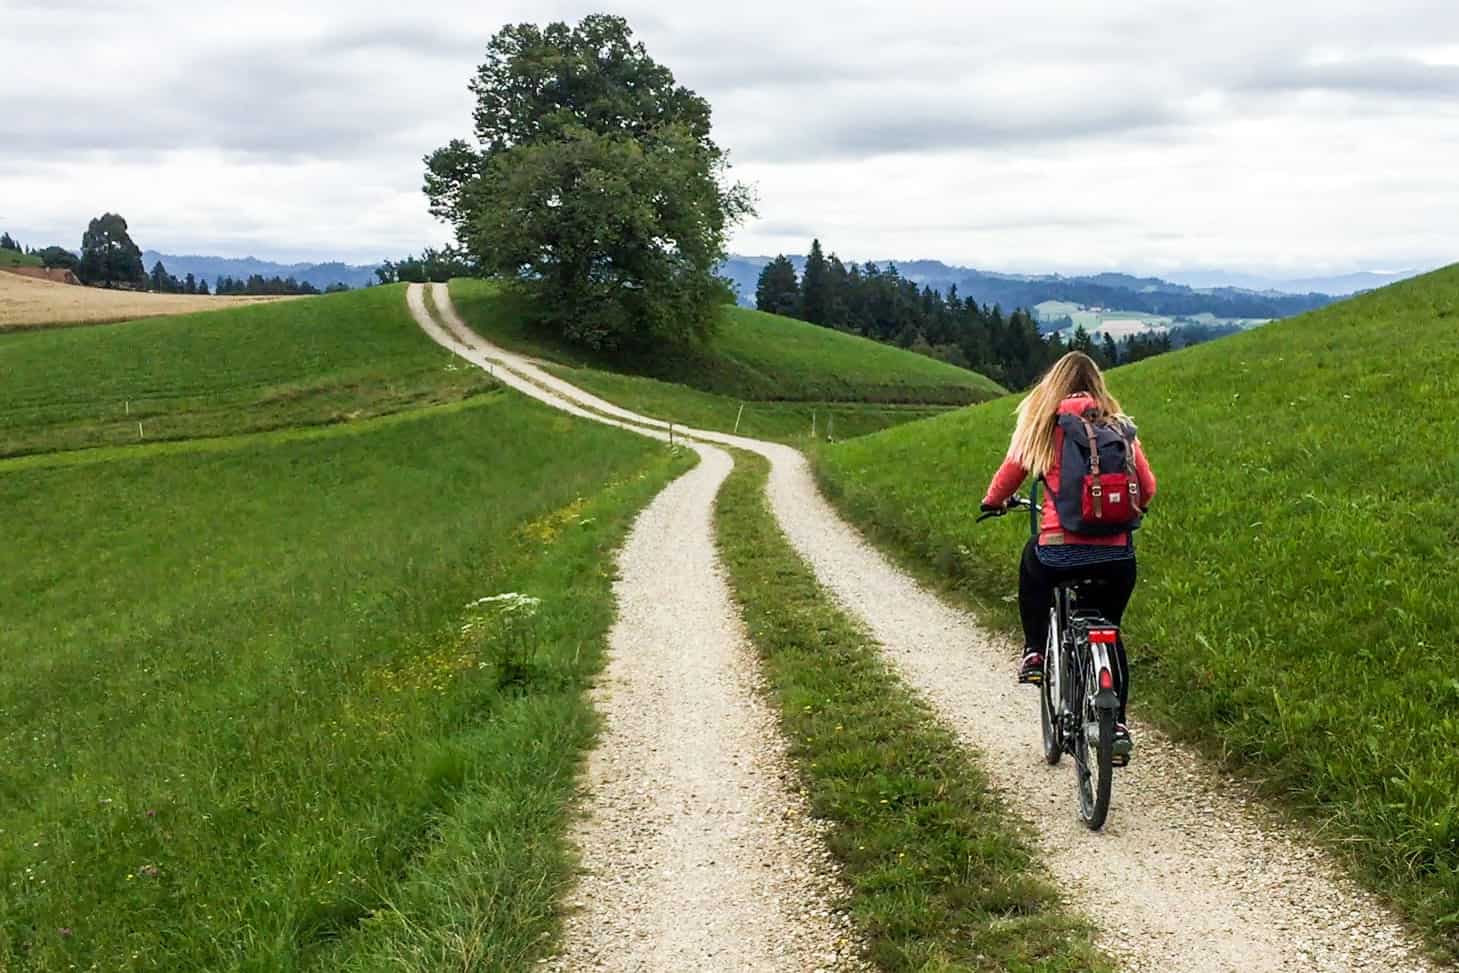 Cycling in The Emmental Valley in Switzerland, close to the city of Bern